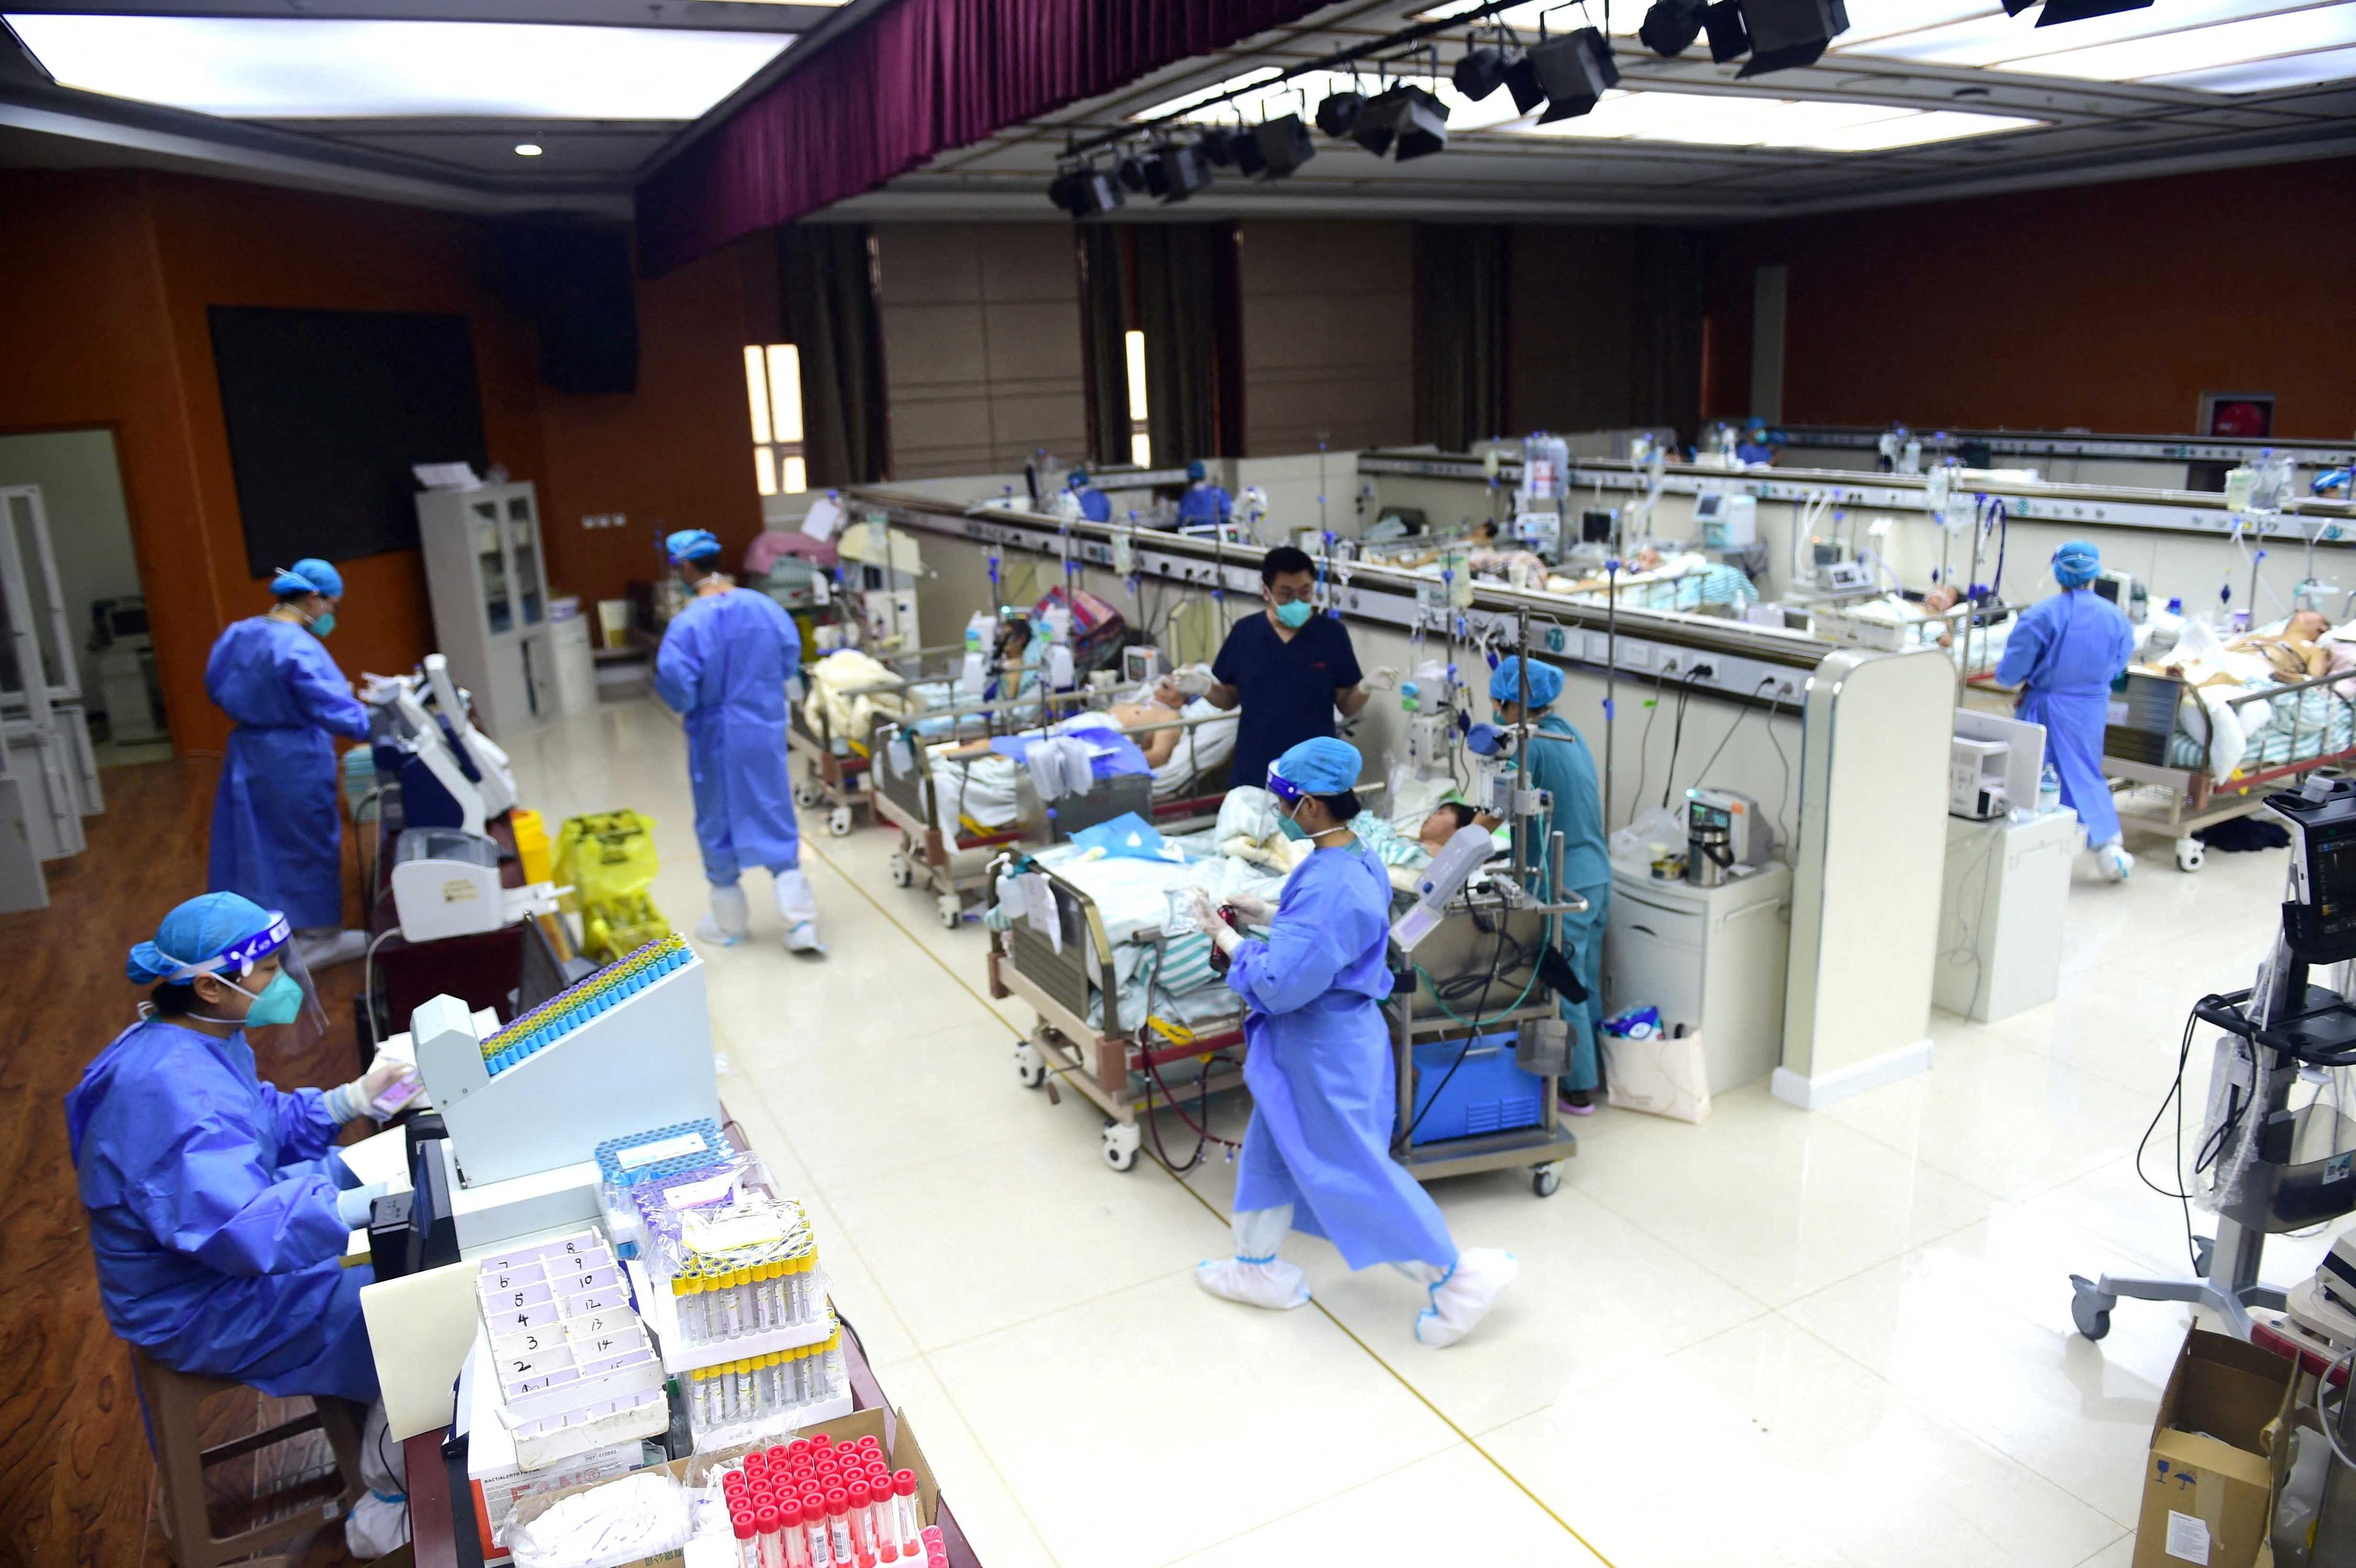 Medical workers attend to patients of Covid-19 at an intensive care unit converted from a conference room, at a hospital in Cangzhou, Hebei province, China Jan 11. Photo: Reuters